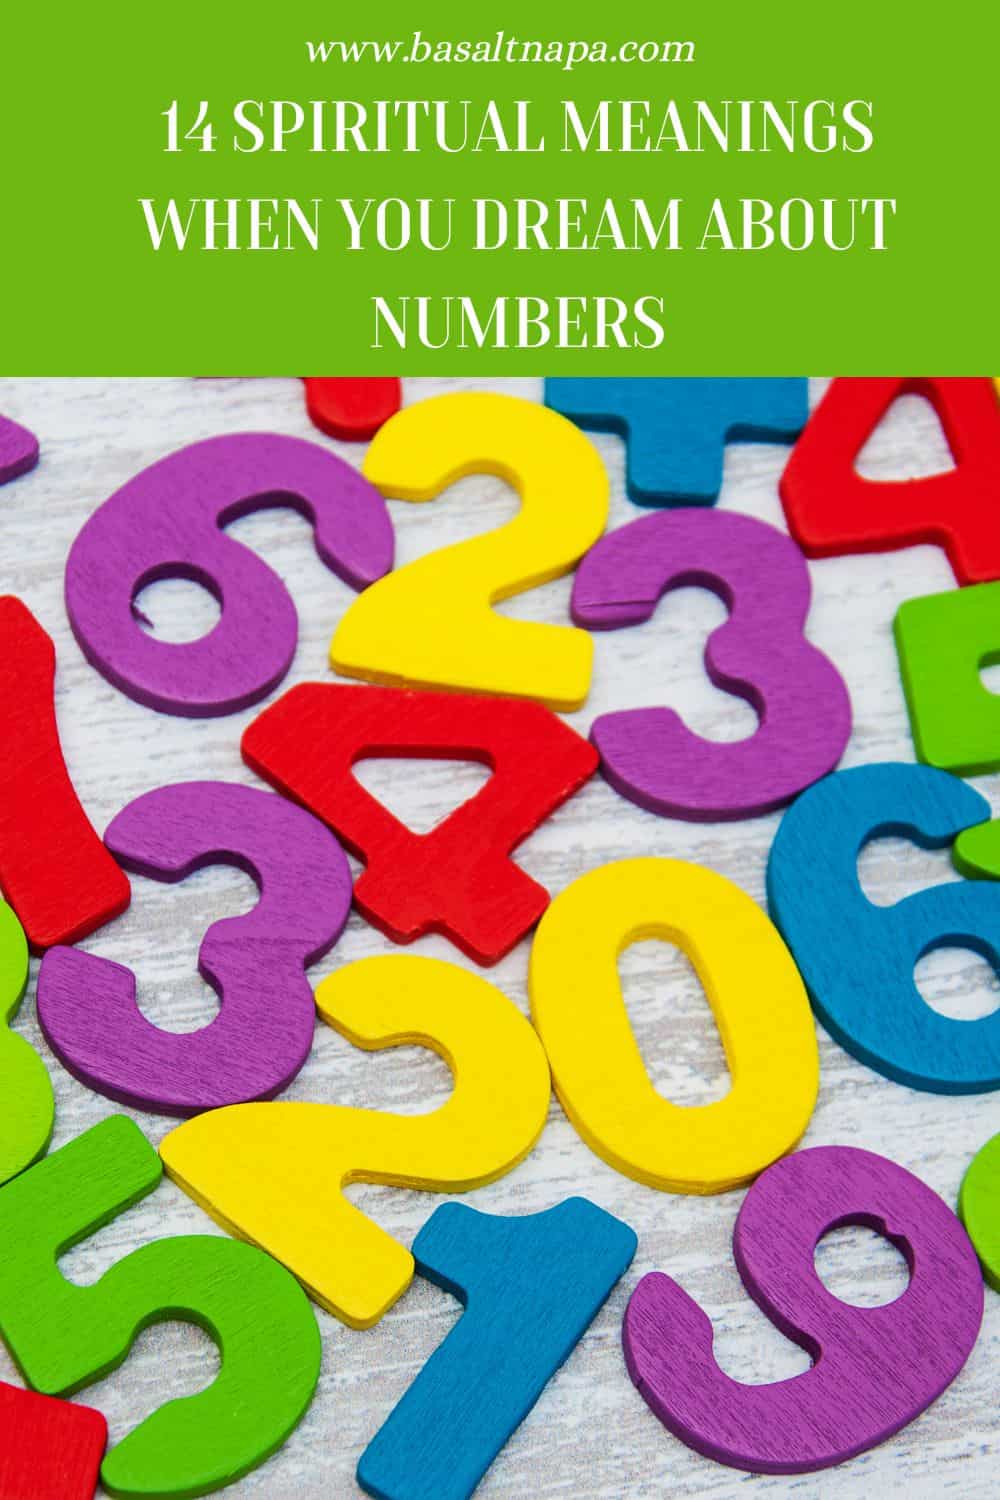 What Does It Mean When You Dream About Numbers?